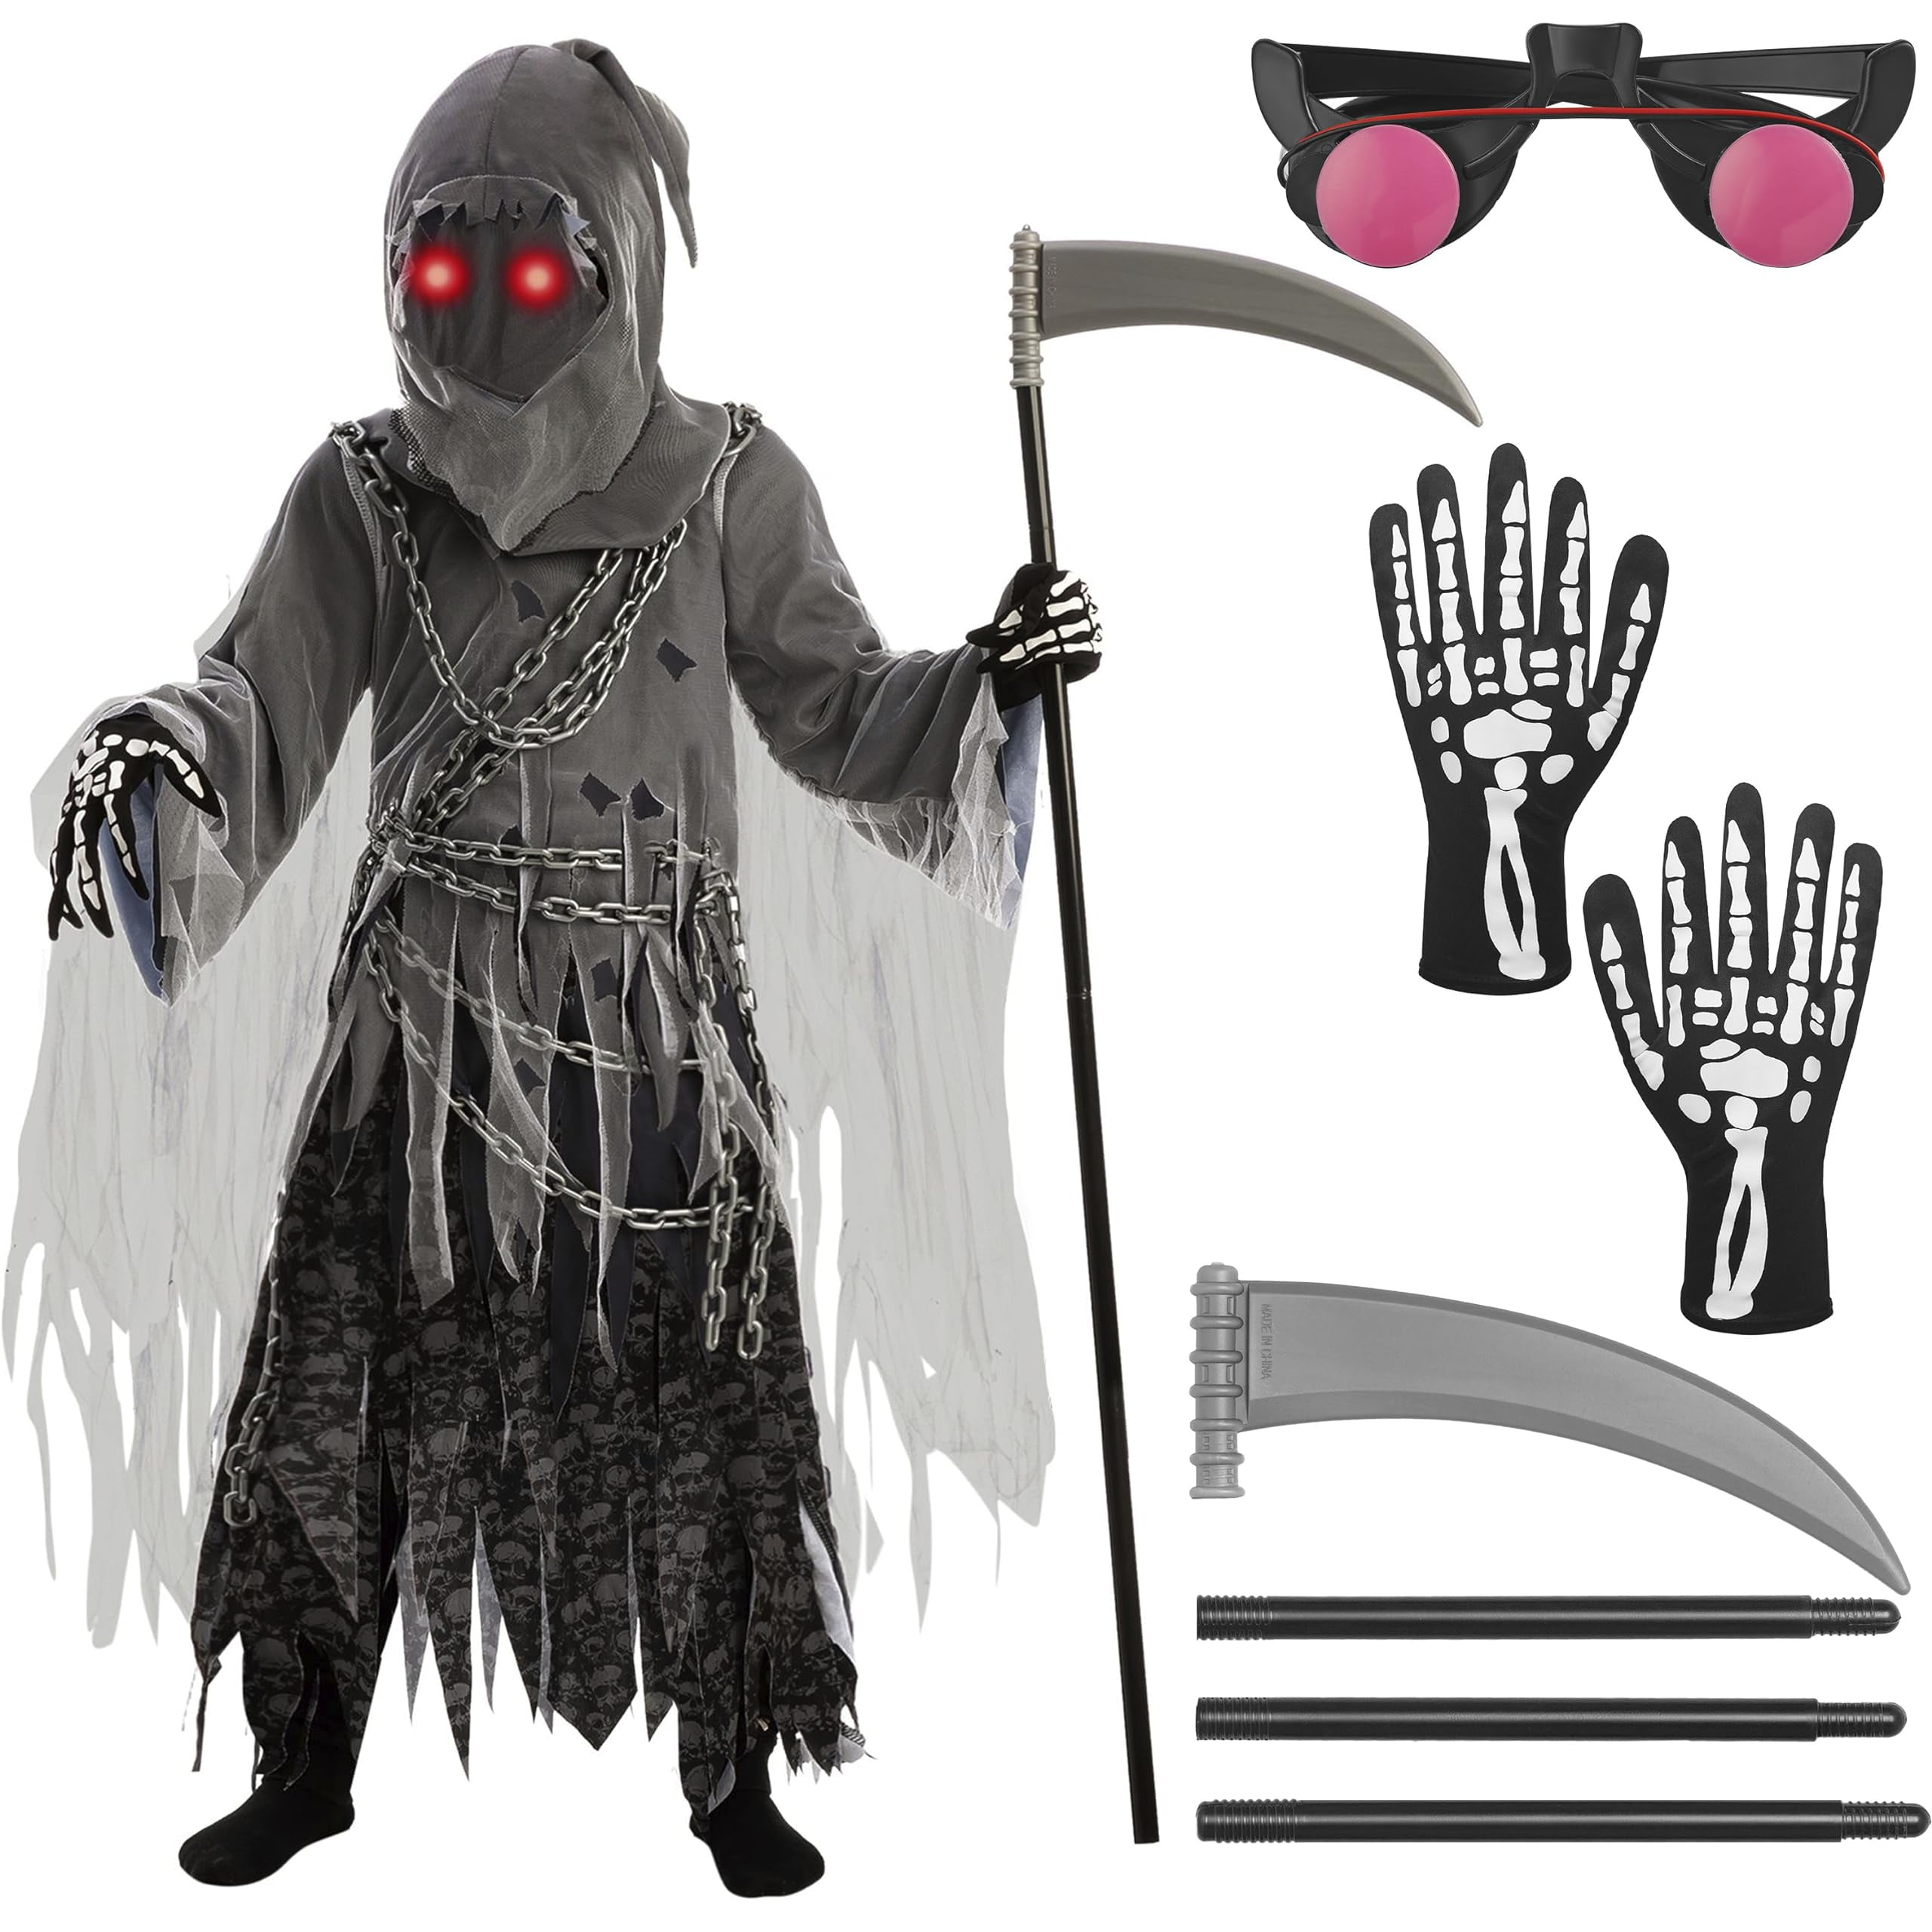 Spooktacular Creations Child Unisex Grim Reaper Costume, Halloween Costume  with Glowing Red Eyes for Kids Trick-or-Treating,S 